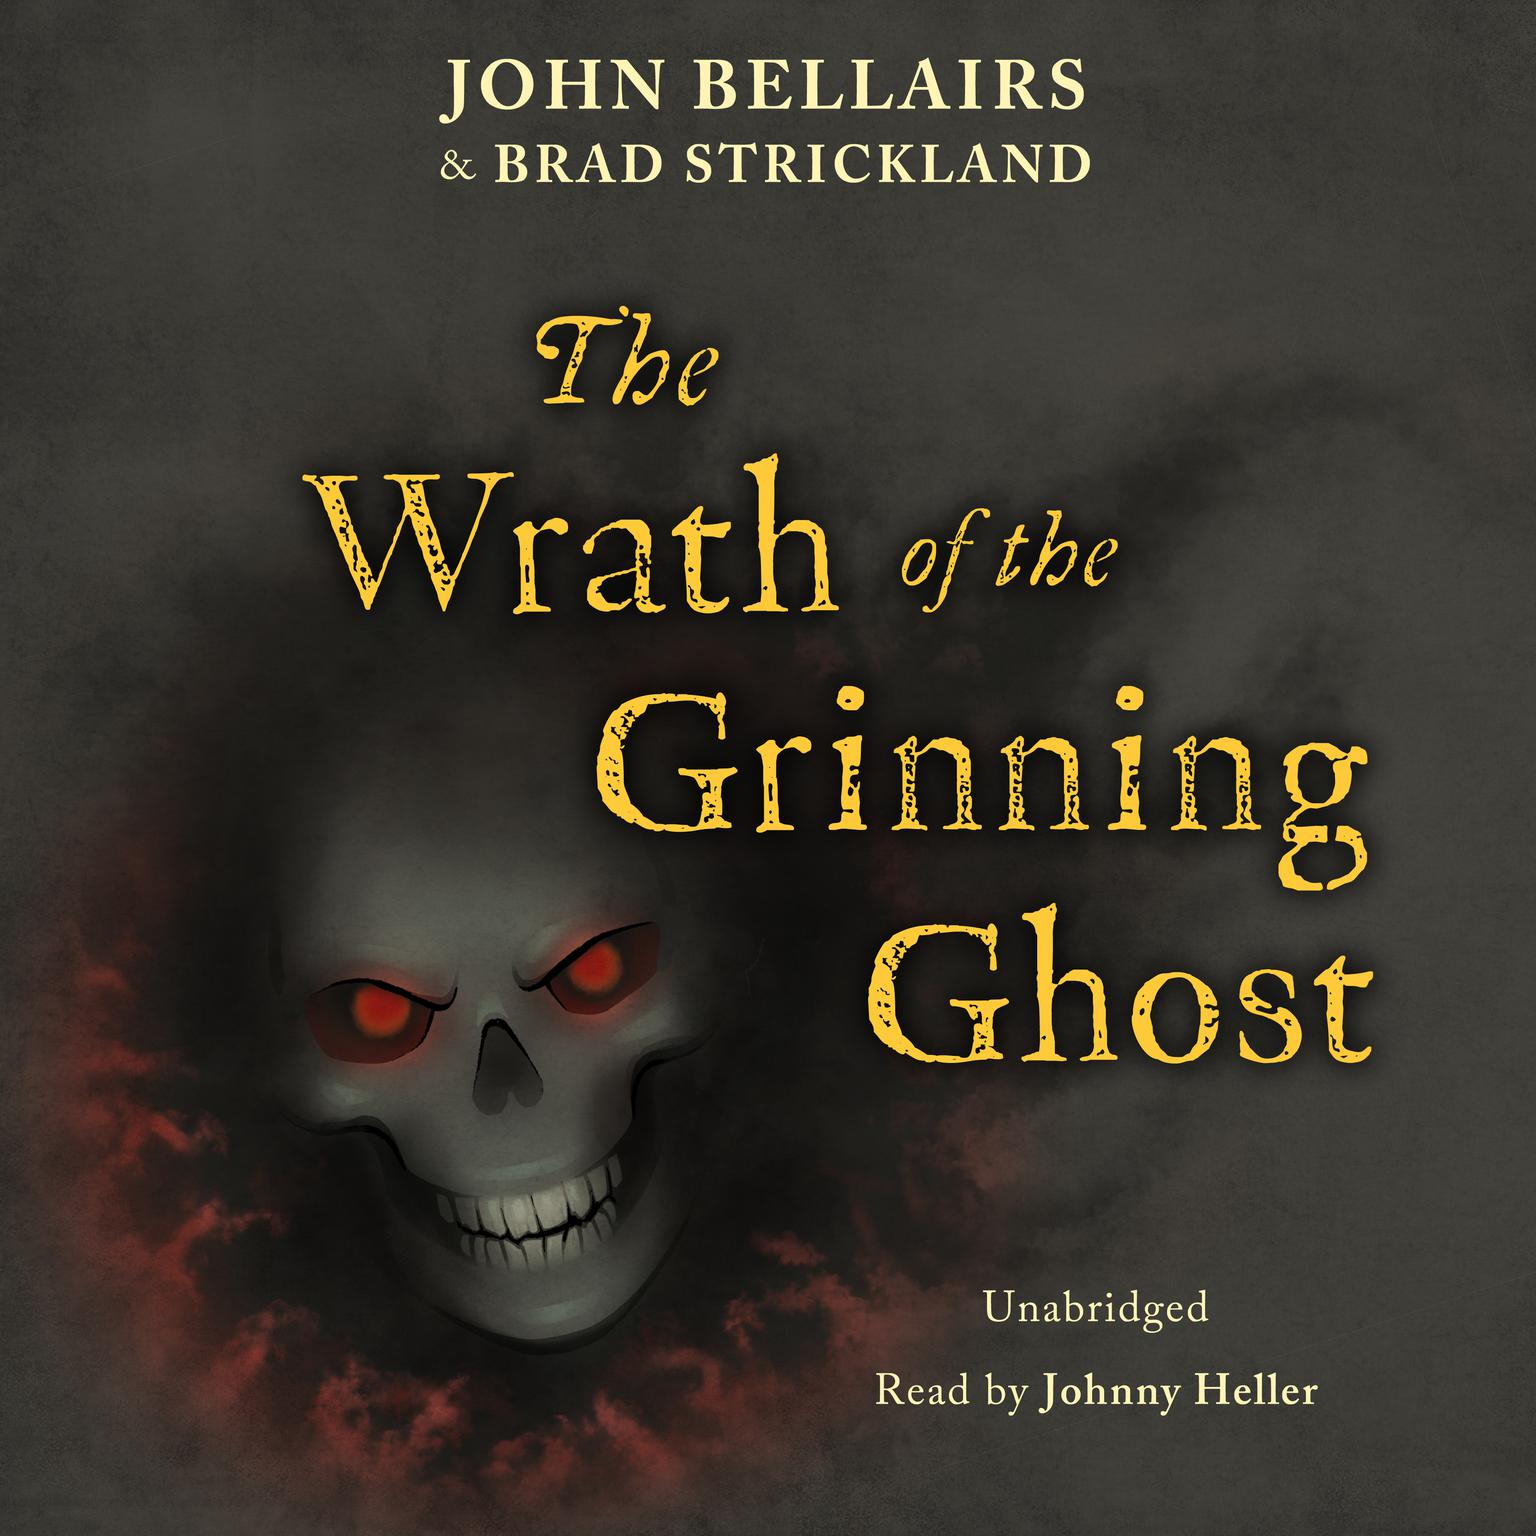 The Wrath of the Grinning Ghost Audiobook, by Brad Strickland